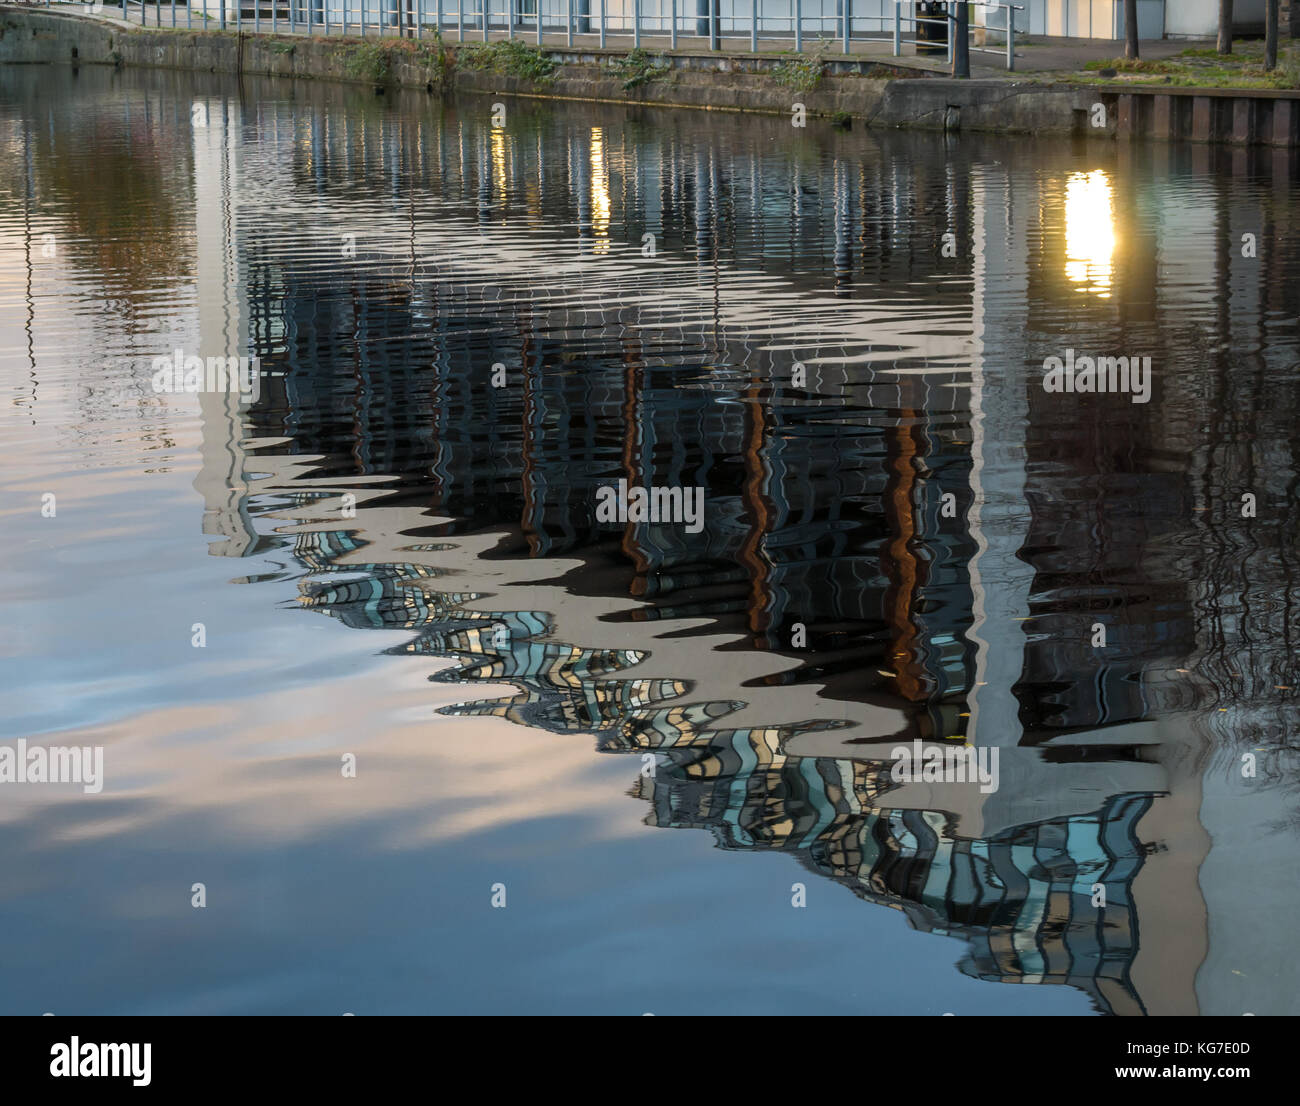 Reflections of modern block of flats in calm water of Water of Leith river, creating wavy abstract patterns, Edinburgh, Scotland, UK Stock Photo